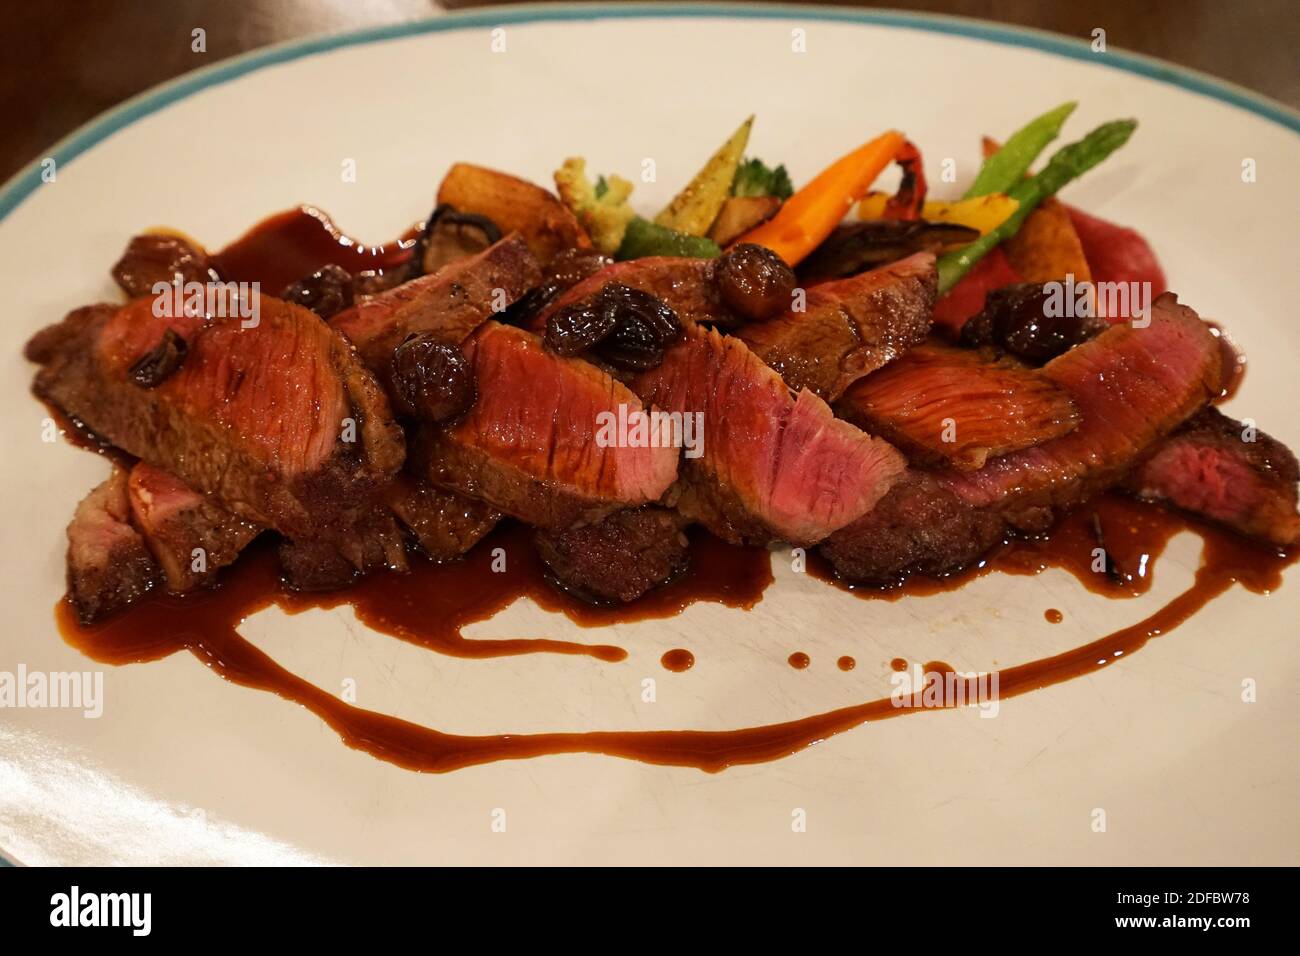 Close up Togliata di Manzo, Rib eye (black angus) steak with red wine and shallot sauce served with dally roasted vegetables Stock Photo